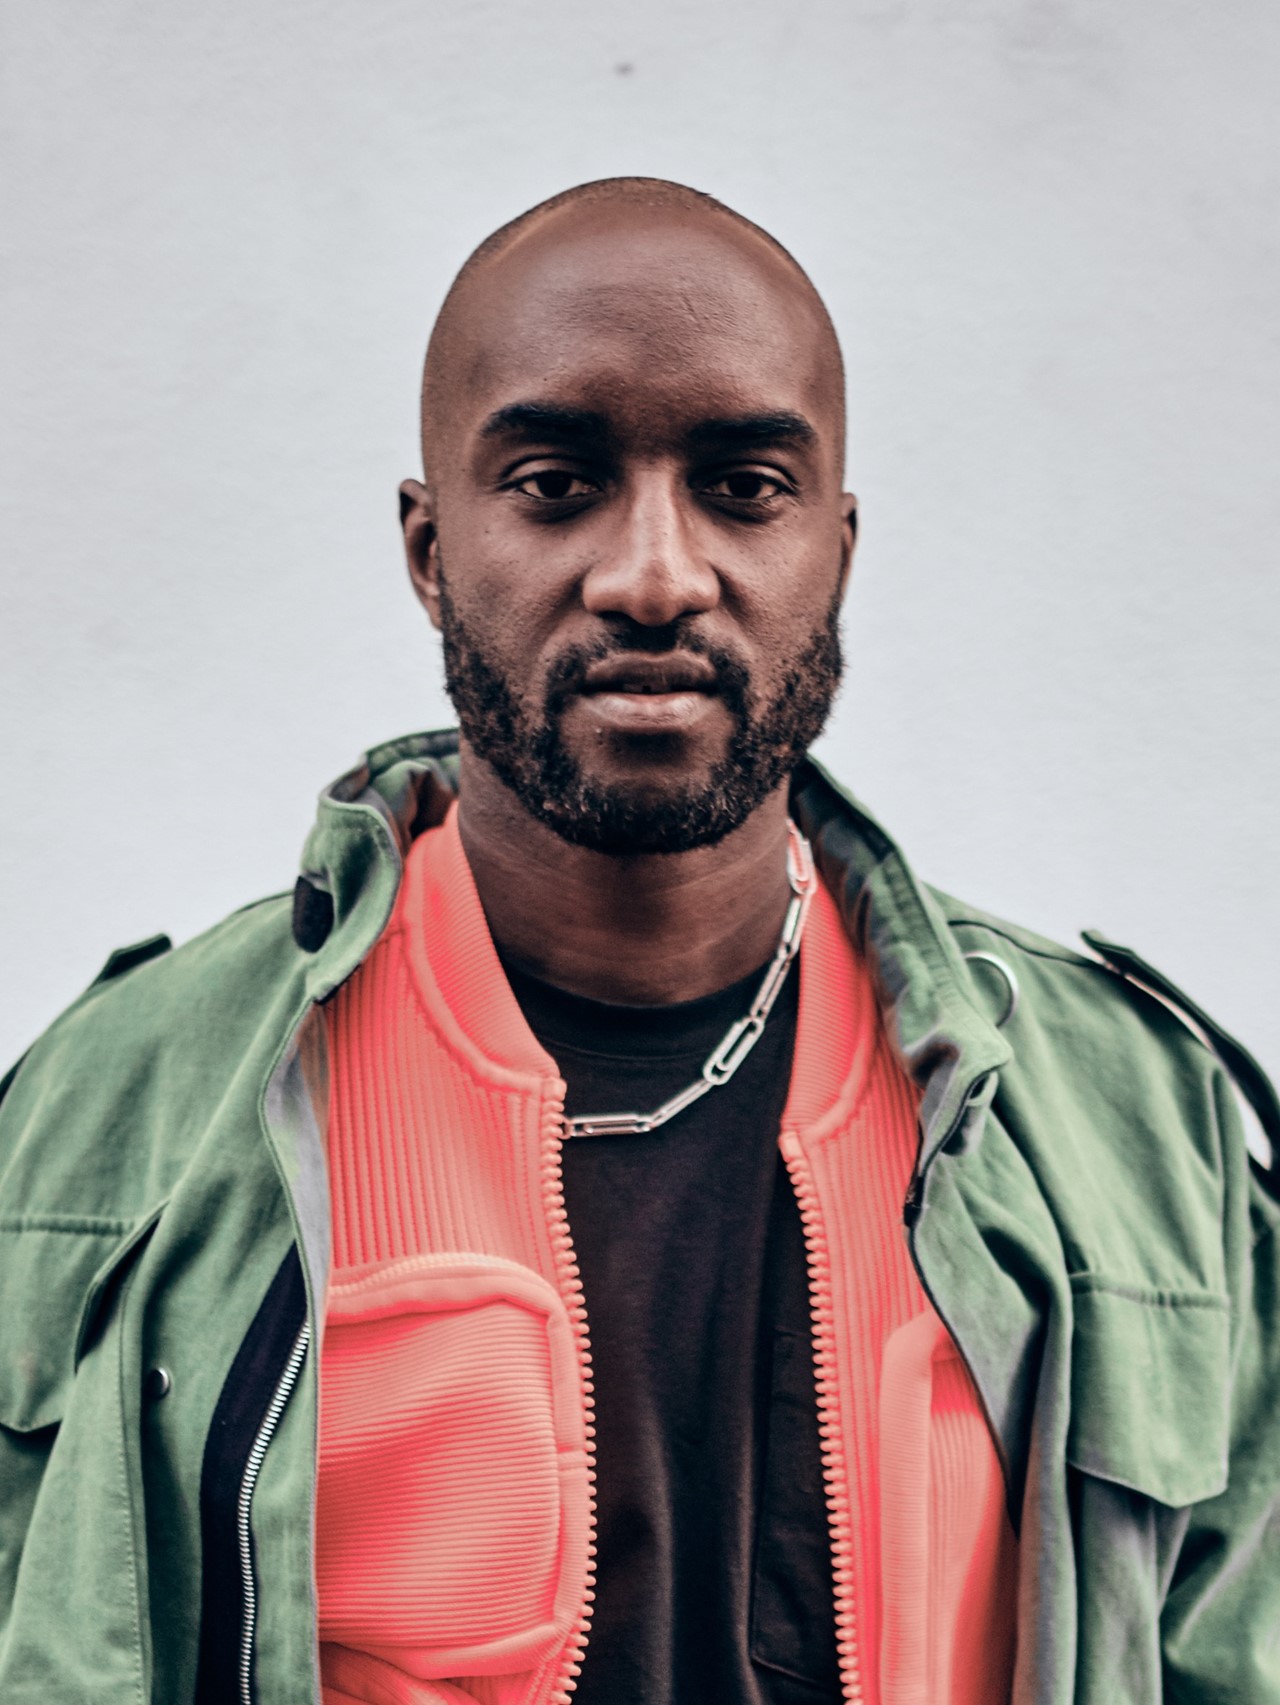 Virgil Abloh's latest collection to be shown as planned in Miami